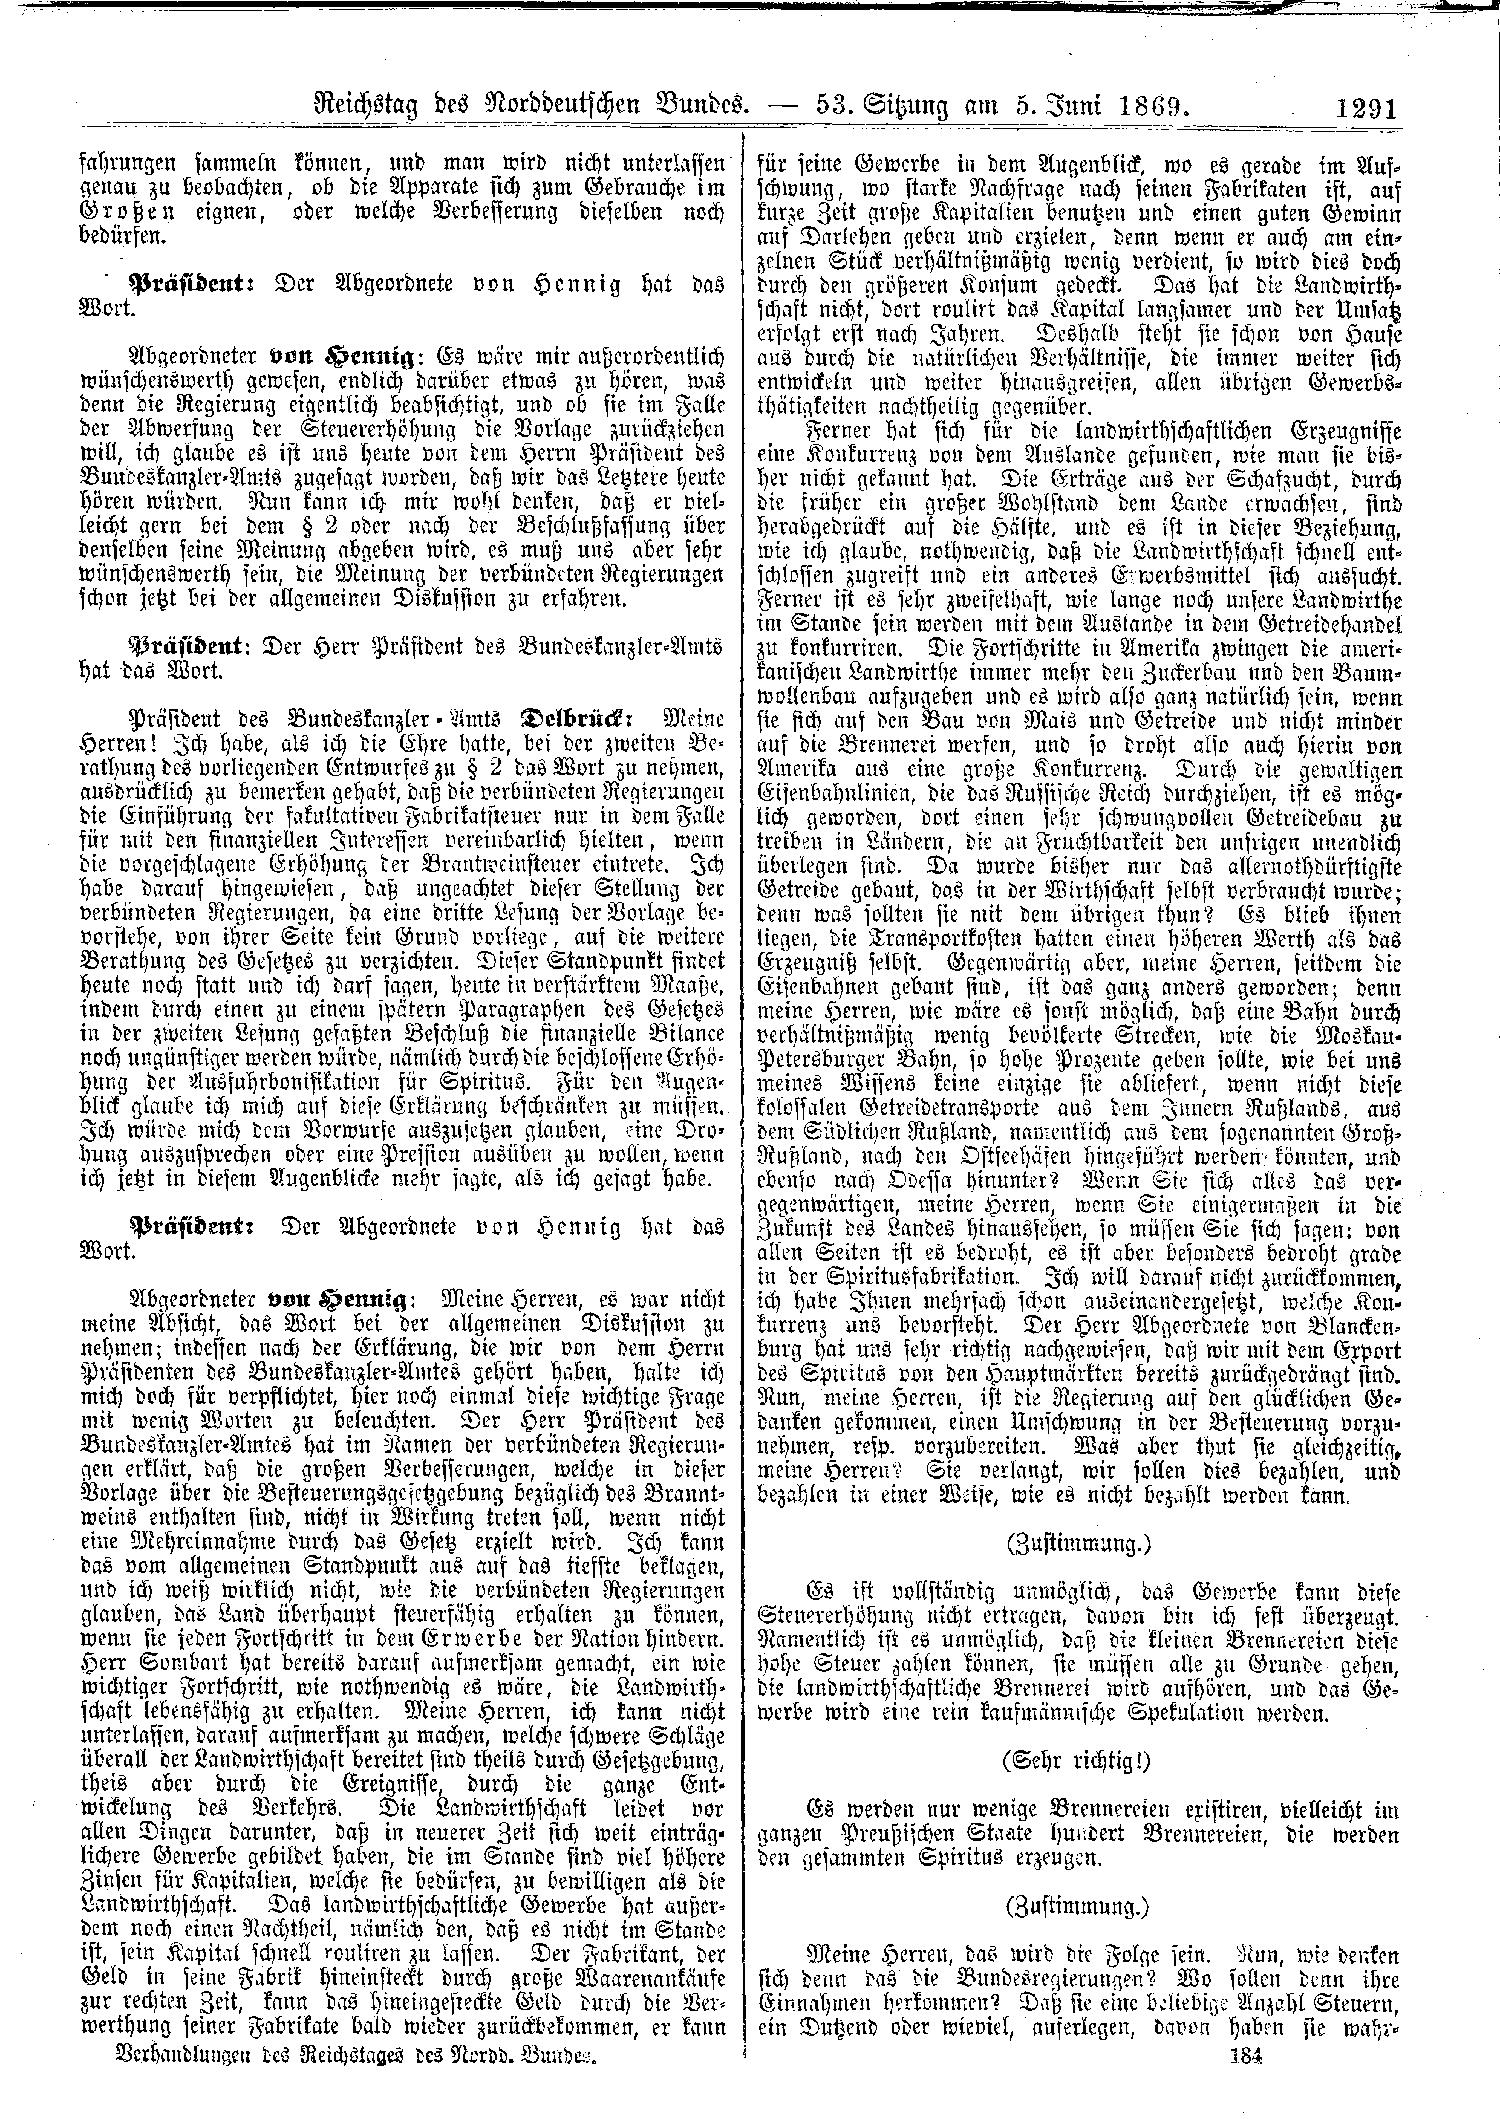 Scan of page 1291